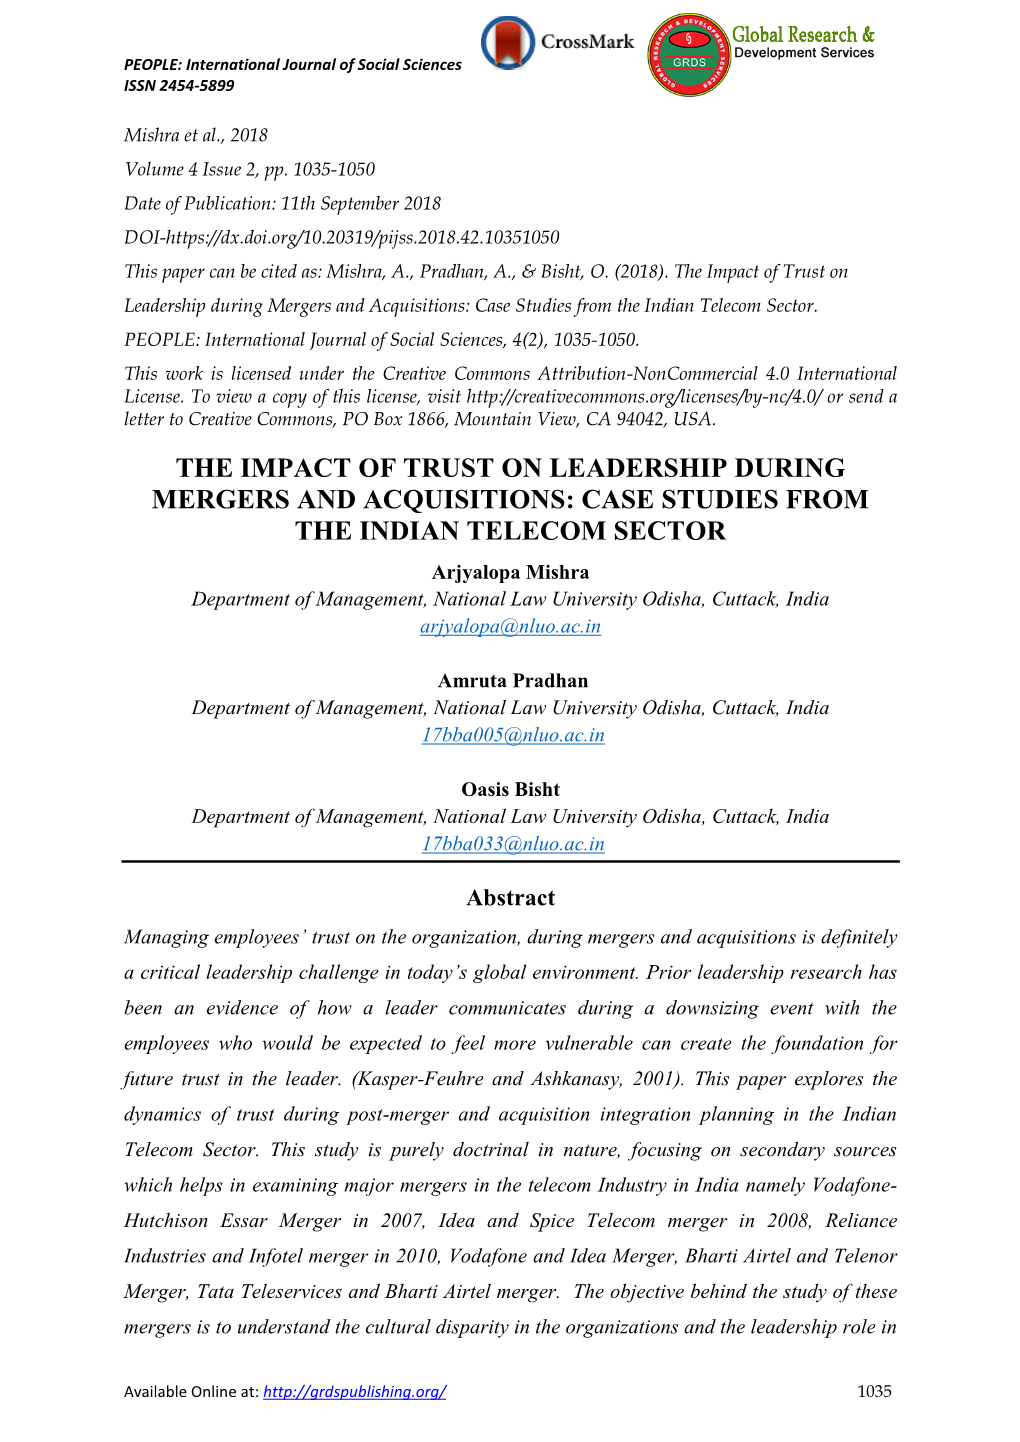 The Impact of Trust on Leadership During Mergers and Acquisitions: Case Studies from the Indian Telecom Sector